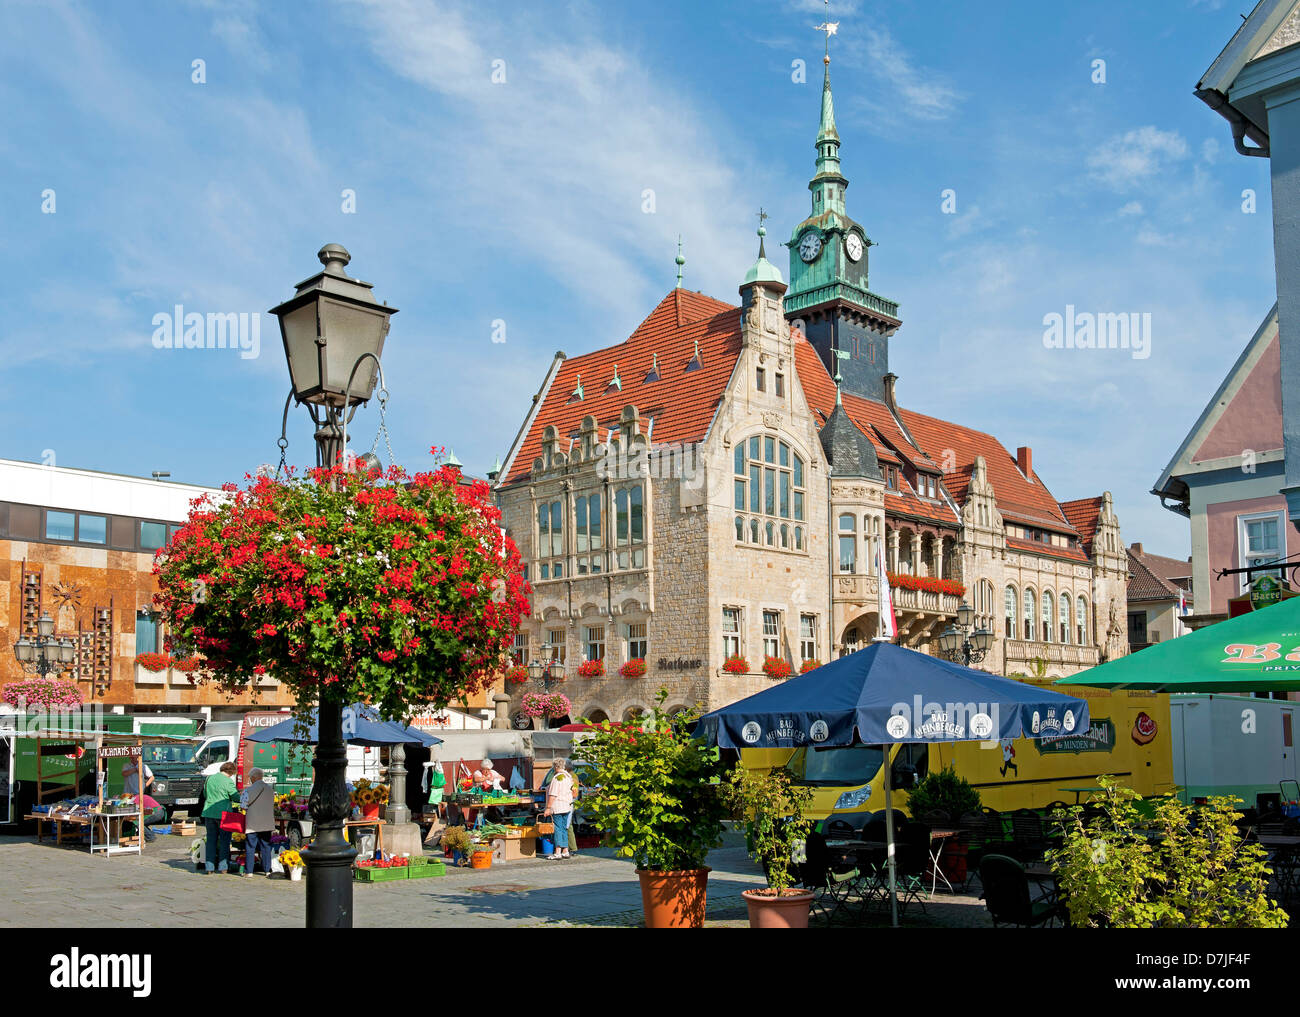 The town hall in Bückeburg, Lower Saxony, Germany Stock Photo